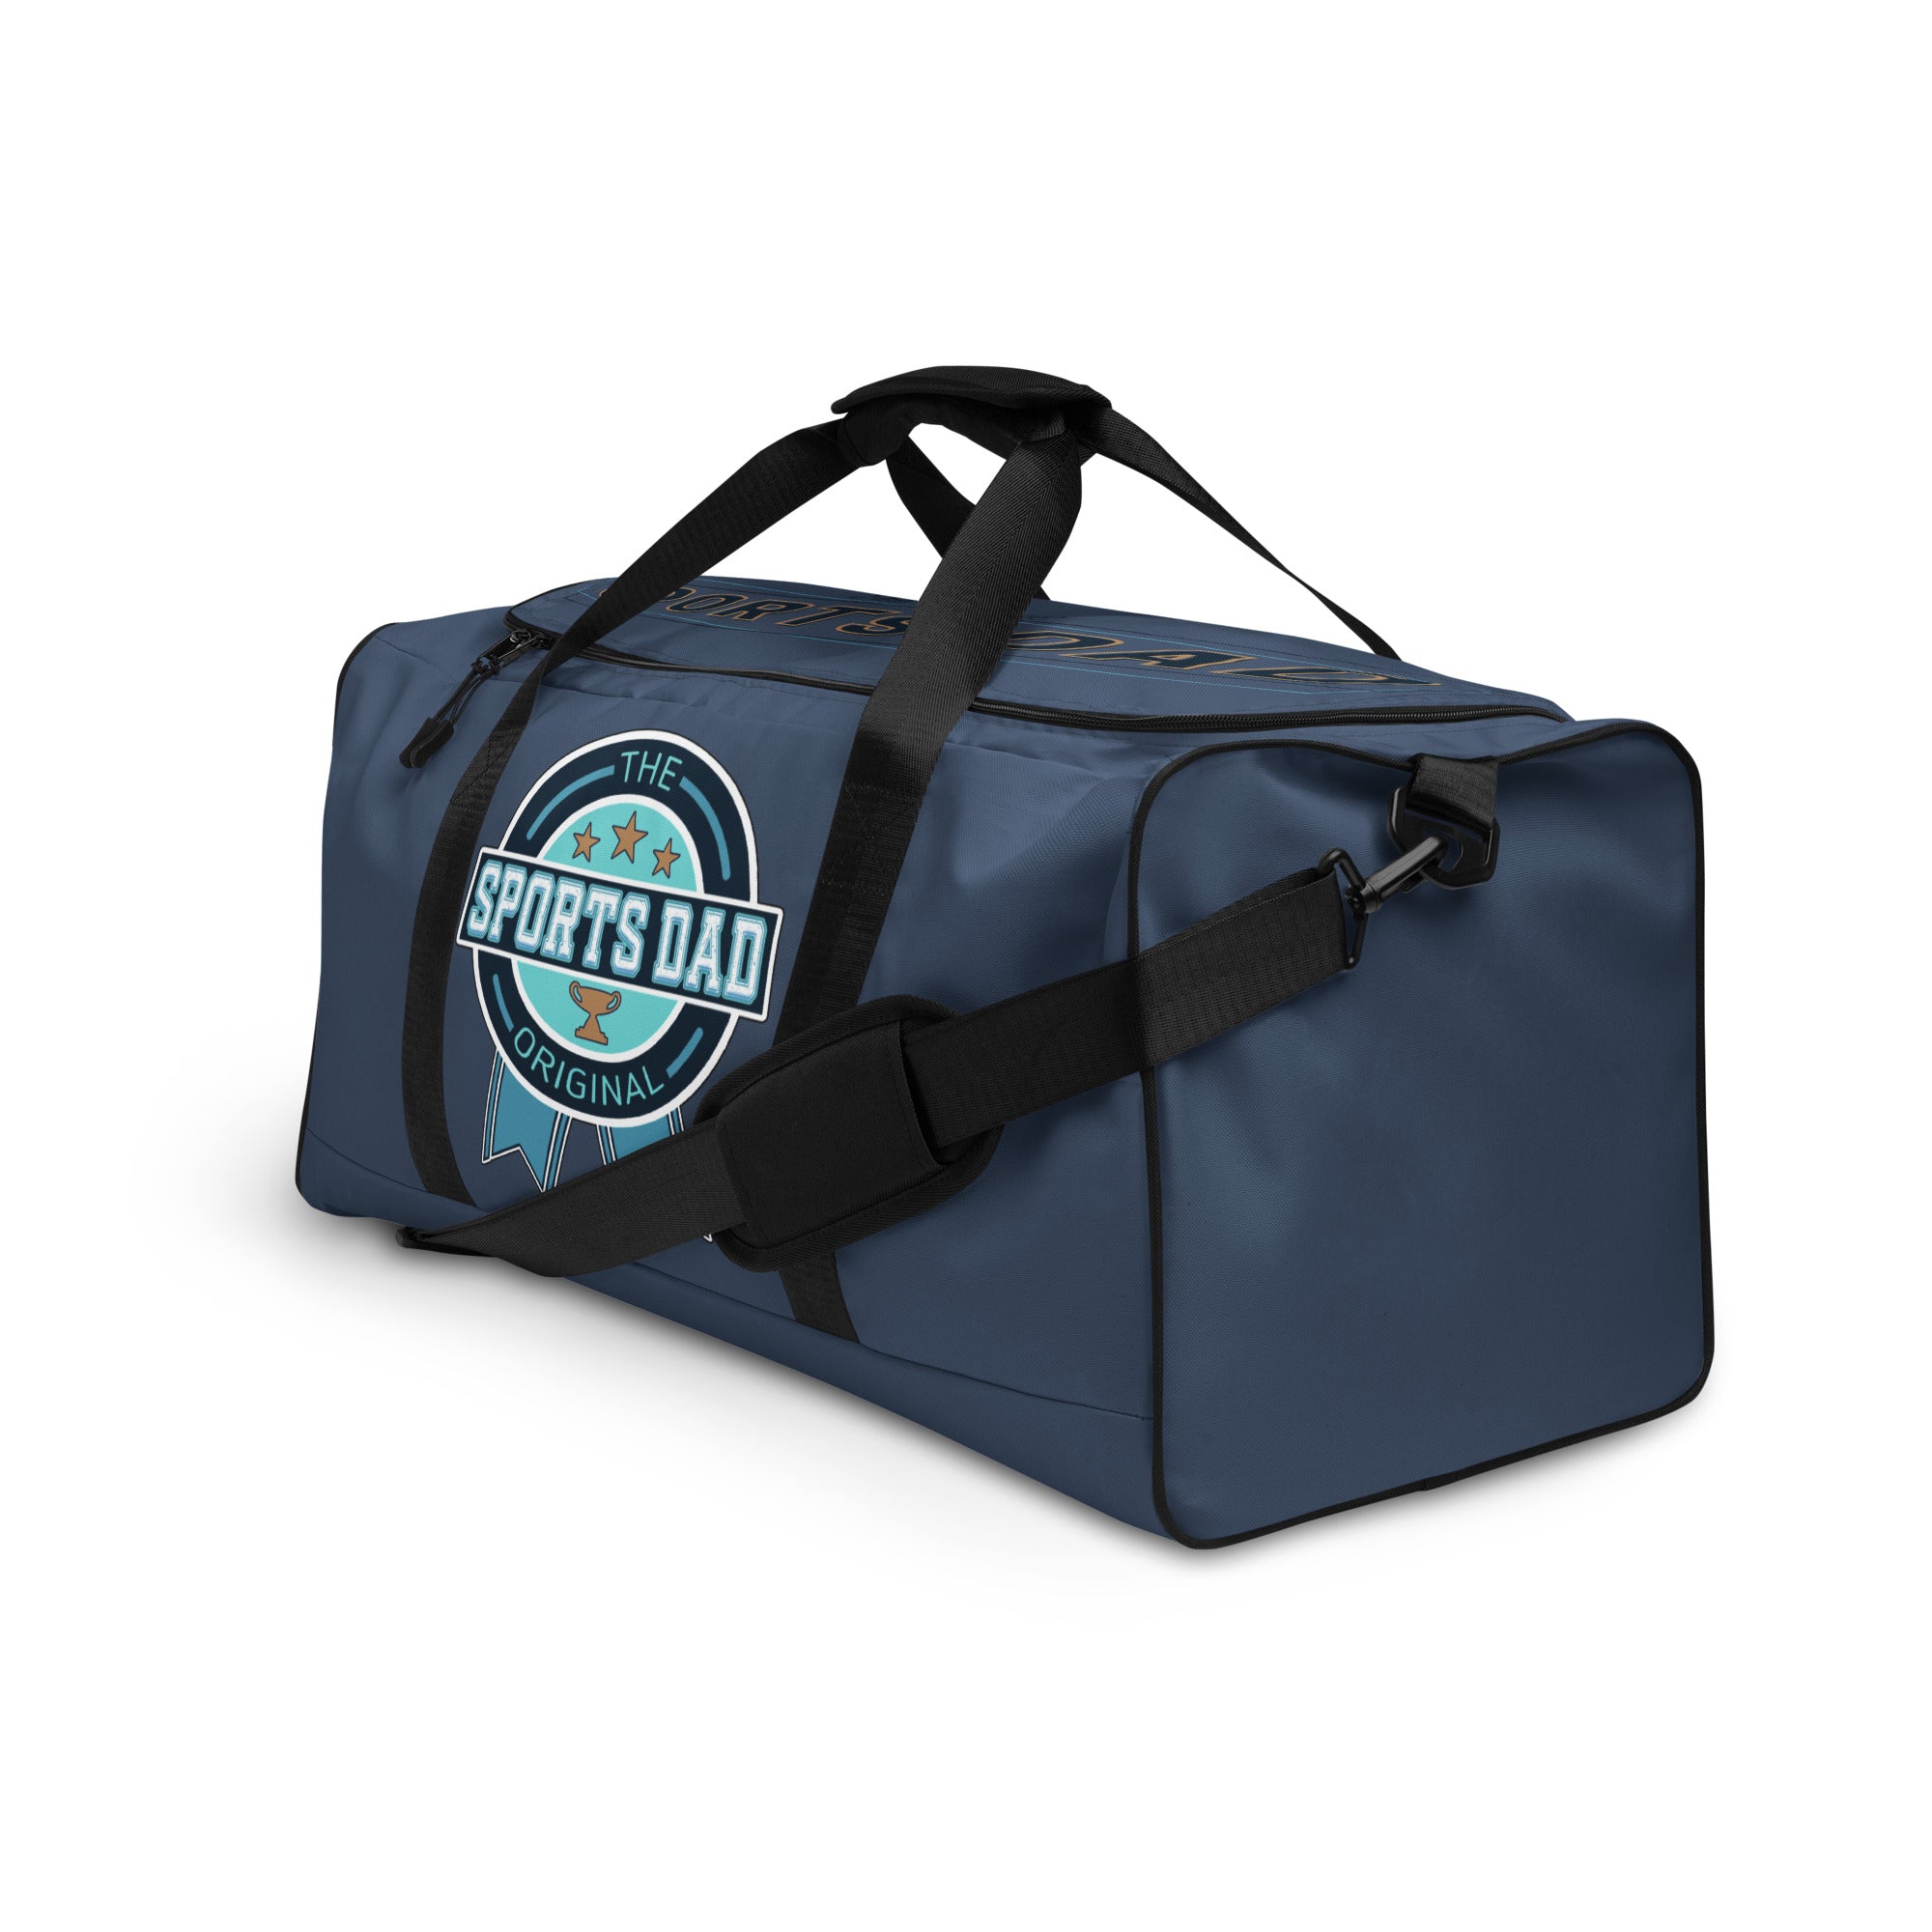 Sports Dad Ultimate Duffle Bag - Cello